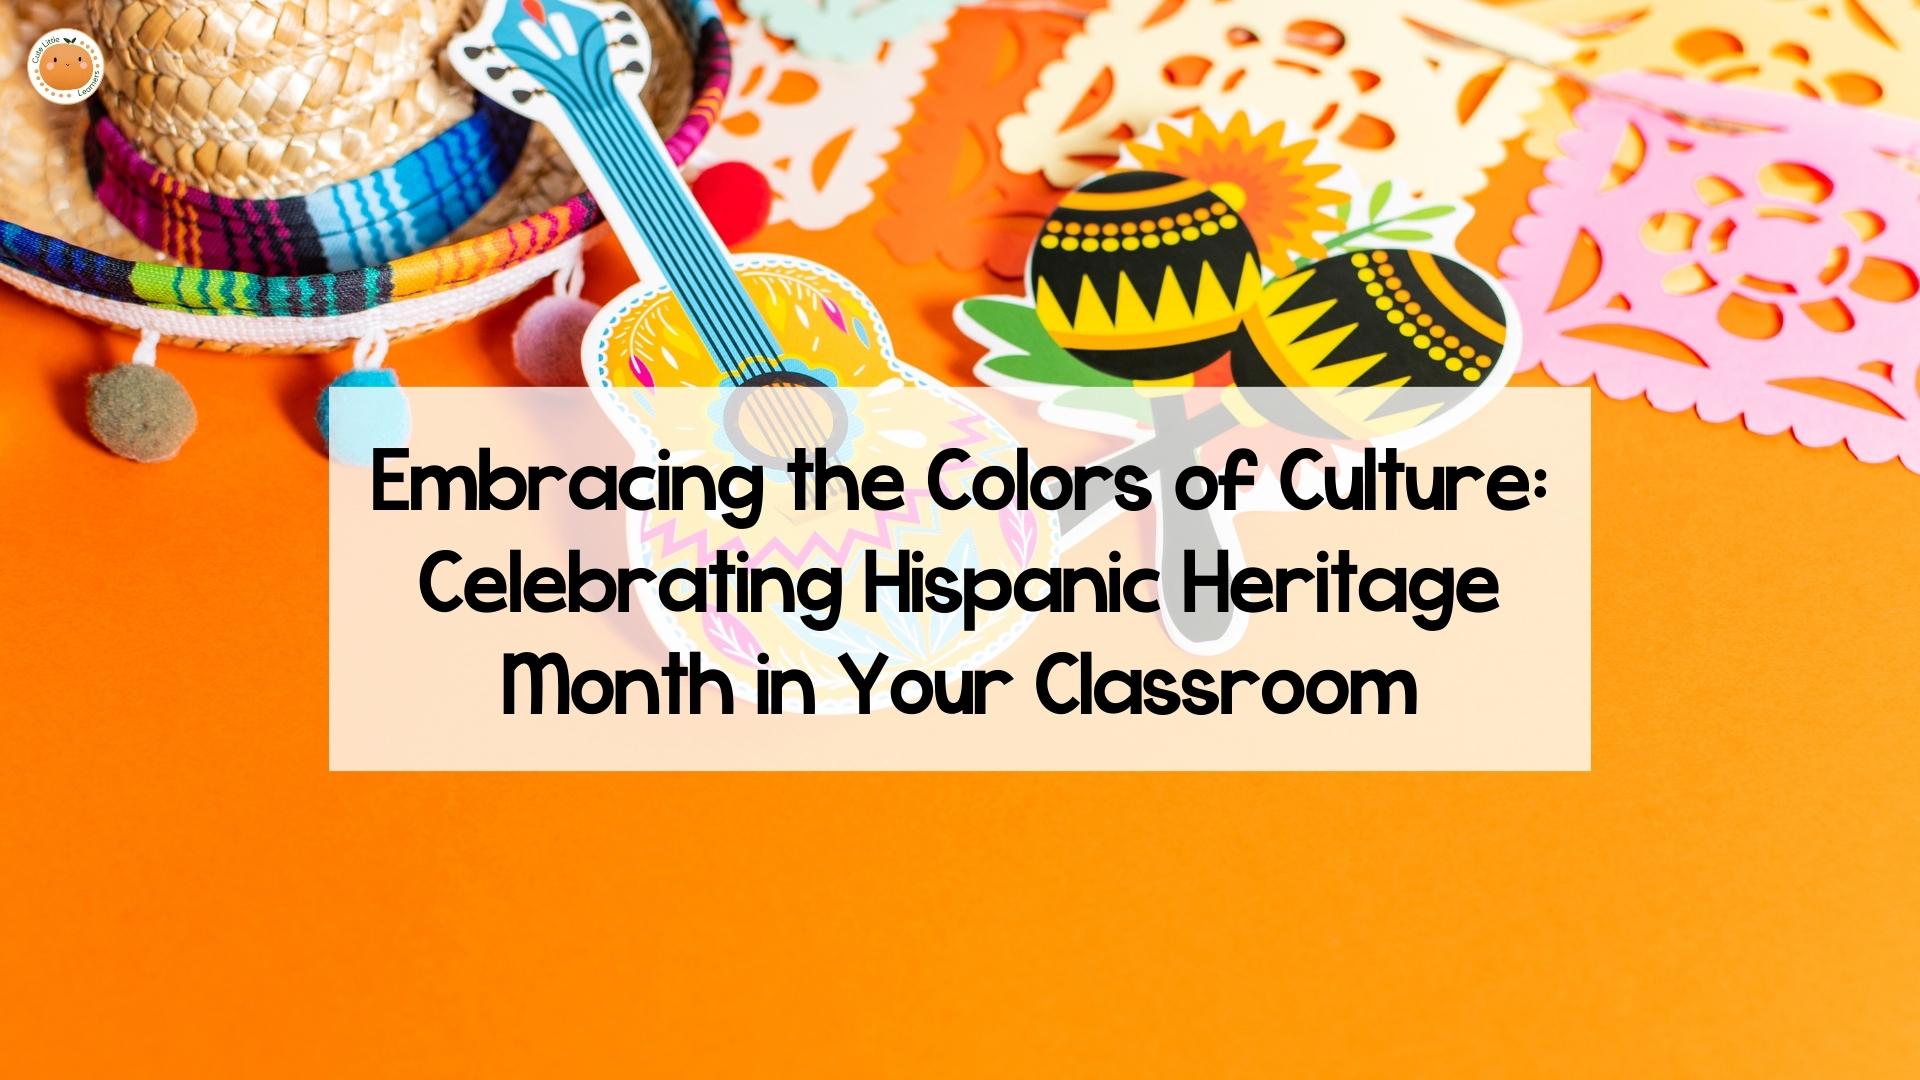 Embracing the Colors of Culture: Celebrating Hispanic Heritage Month in Your Classroom